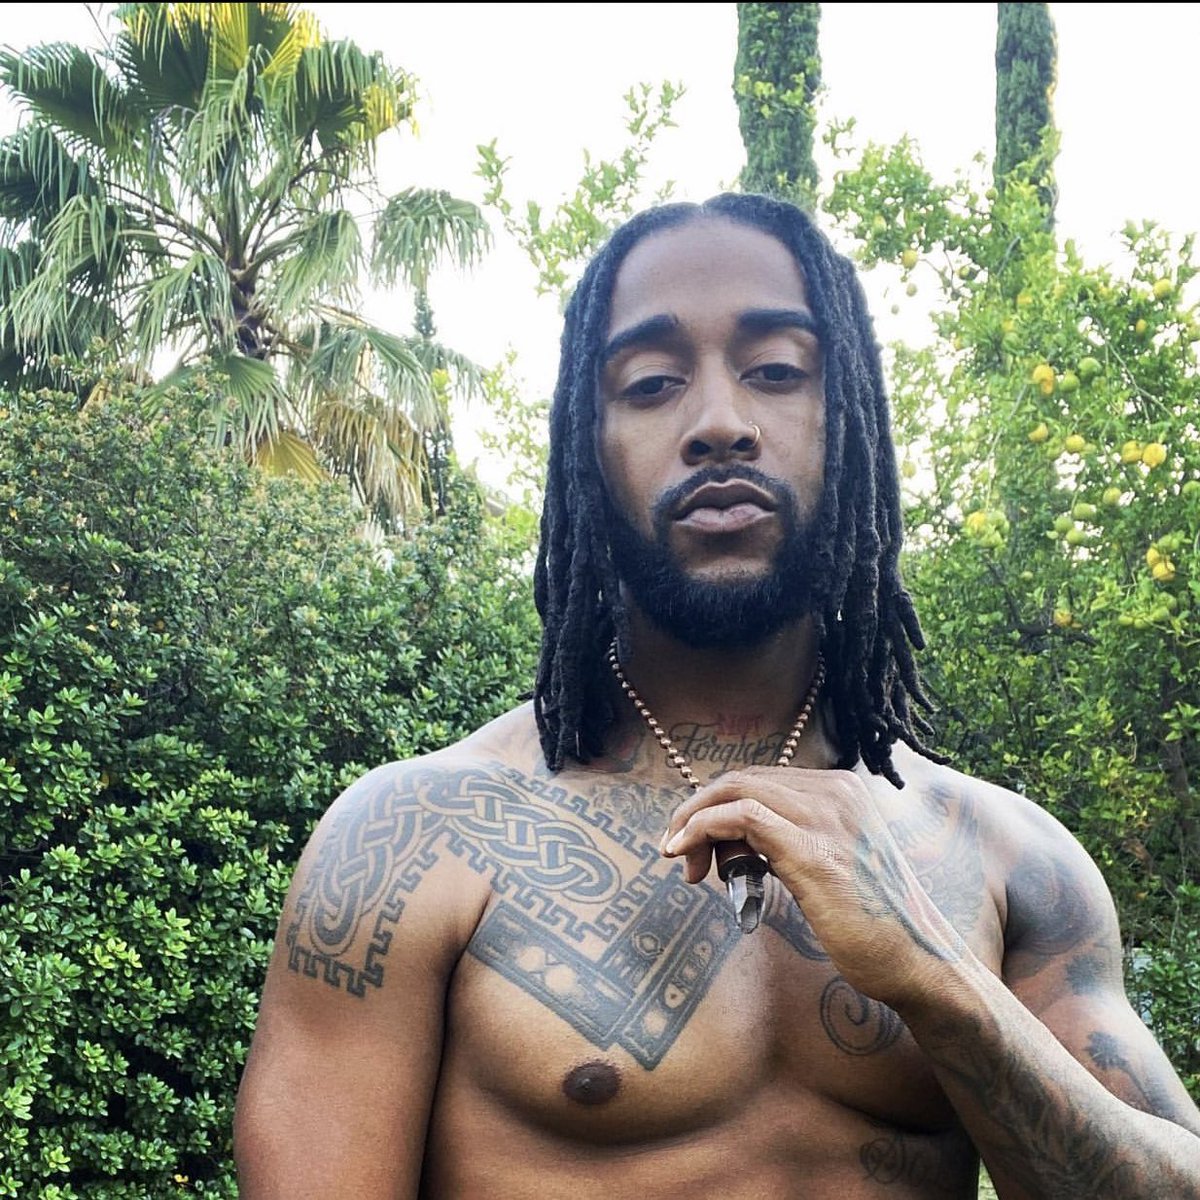 I think we can all agree that Omarion.